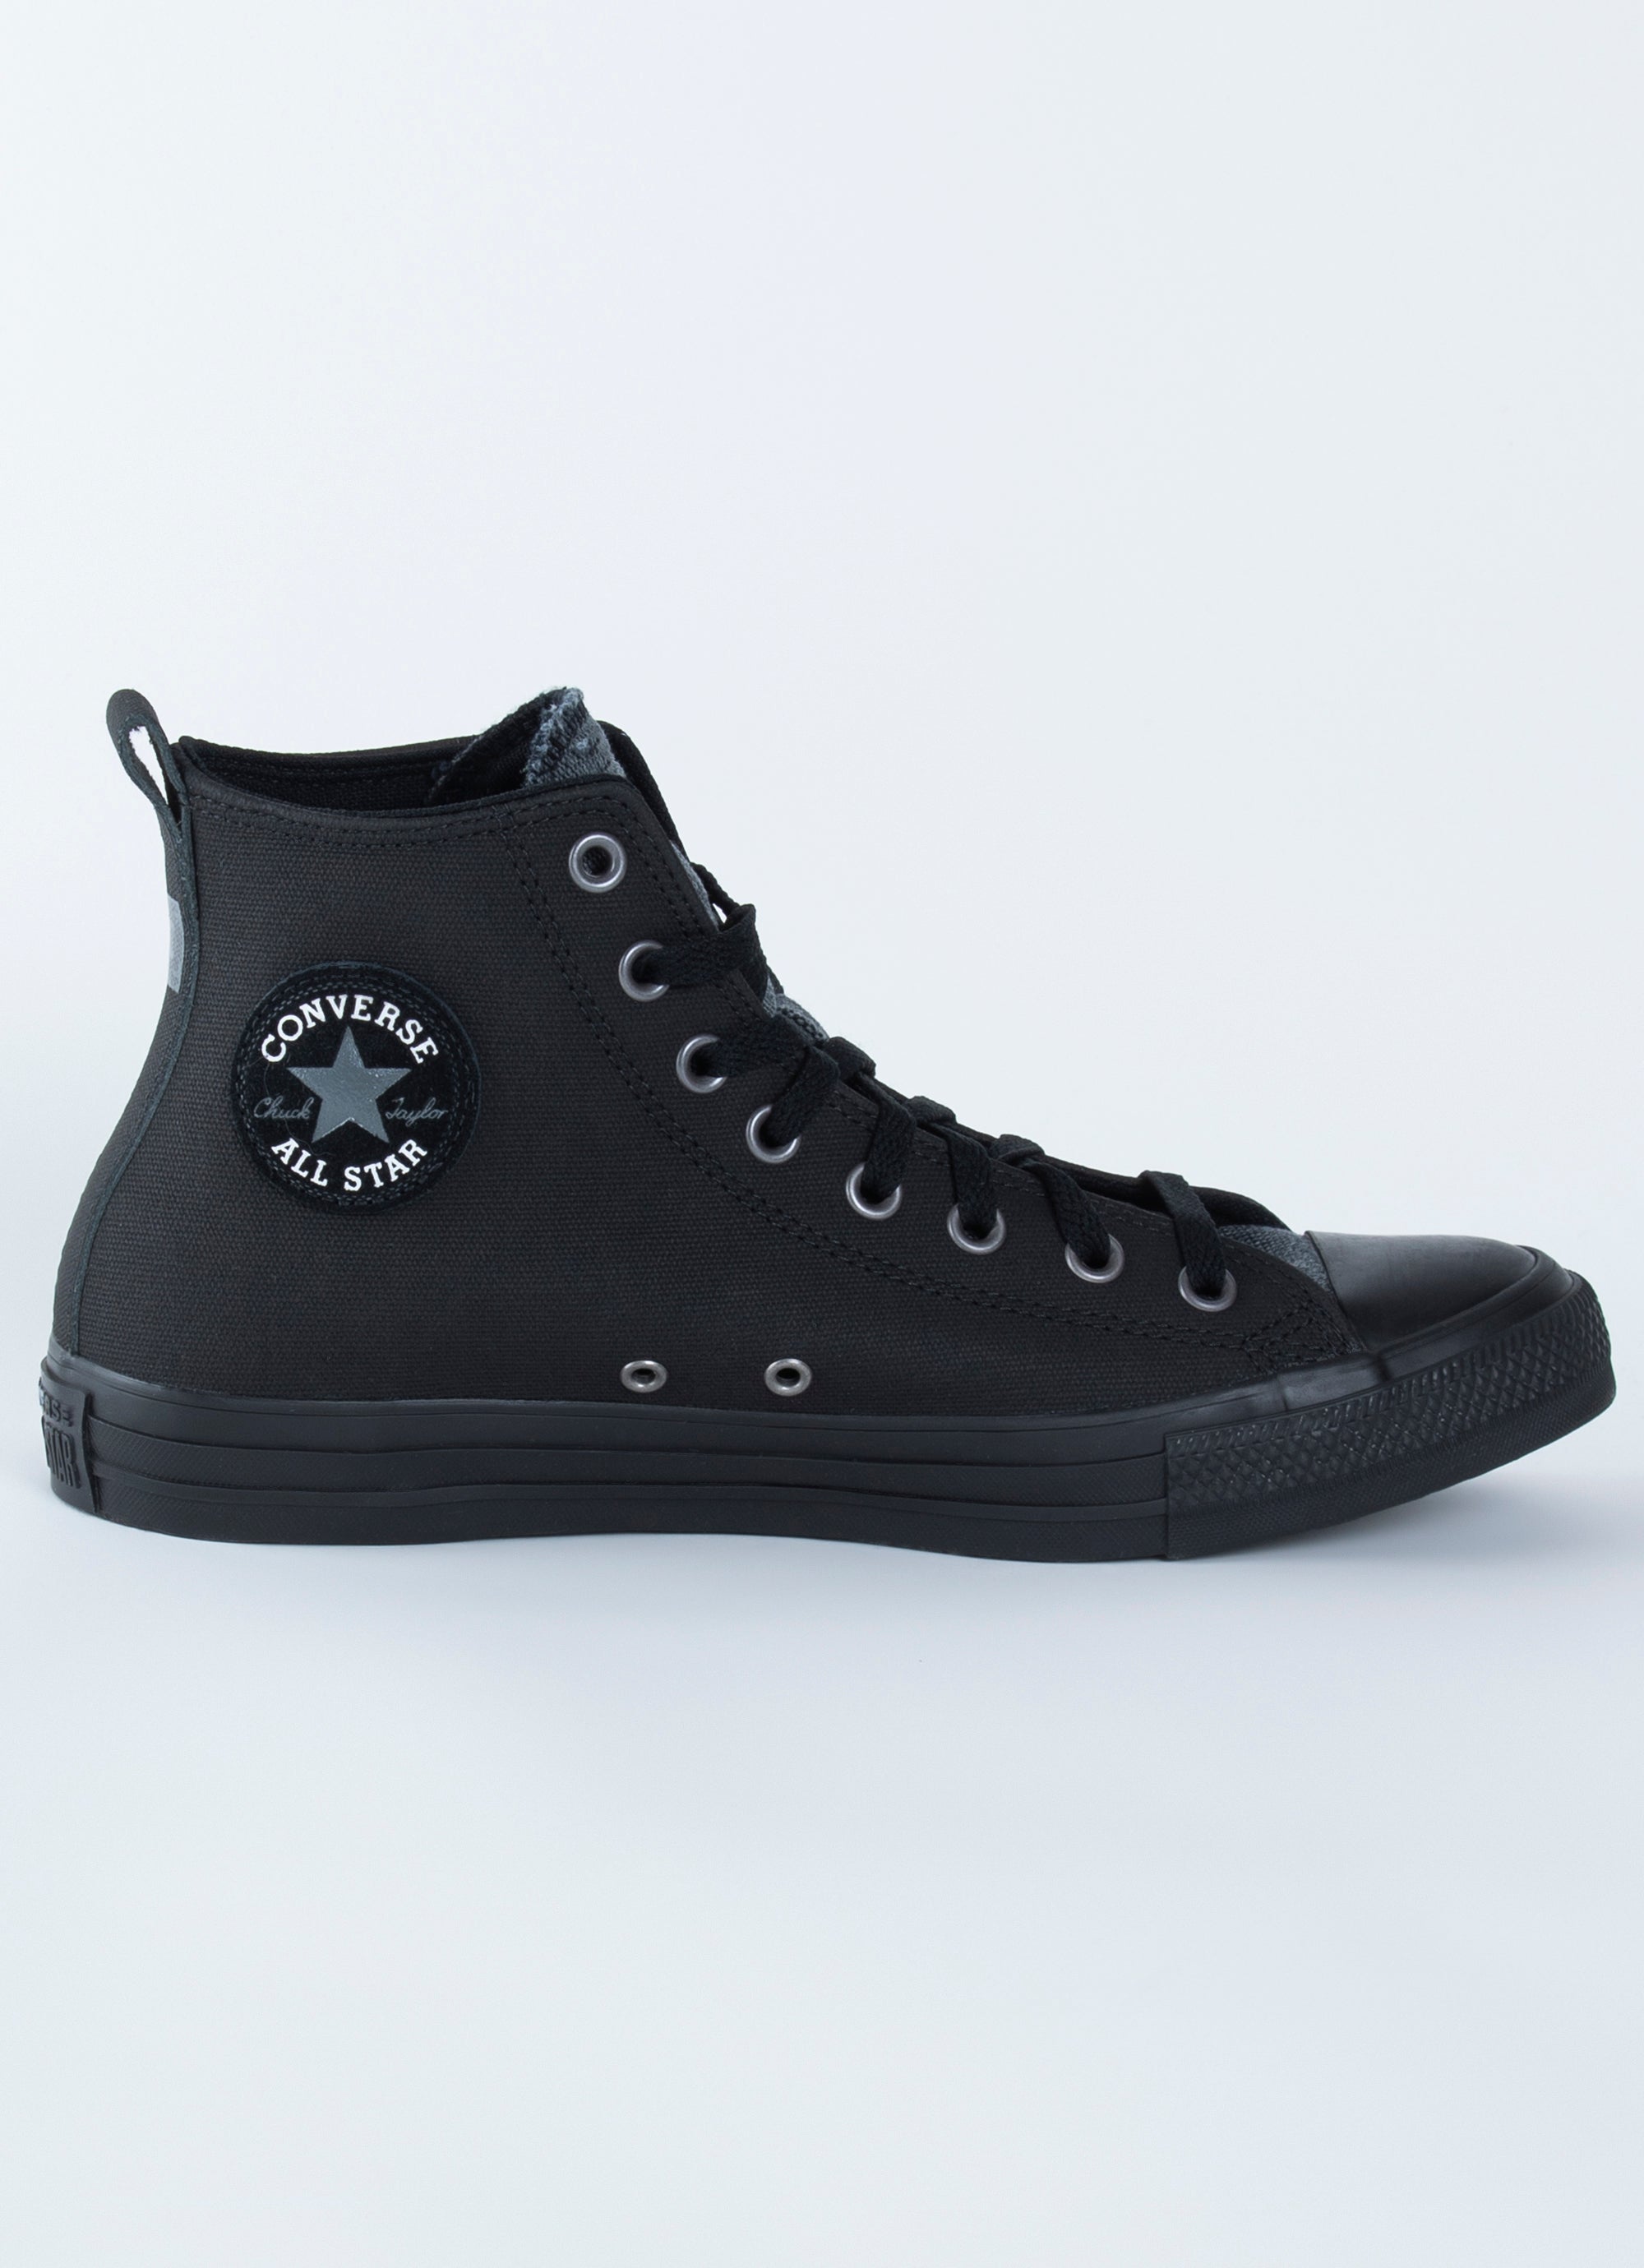 Converse Chuck Taylor All Star in Black Red Rat